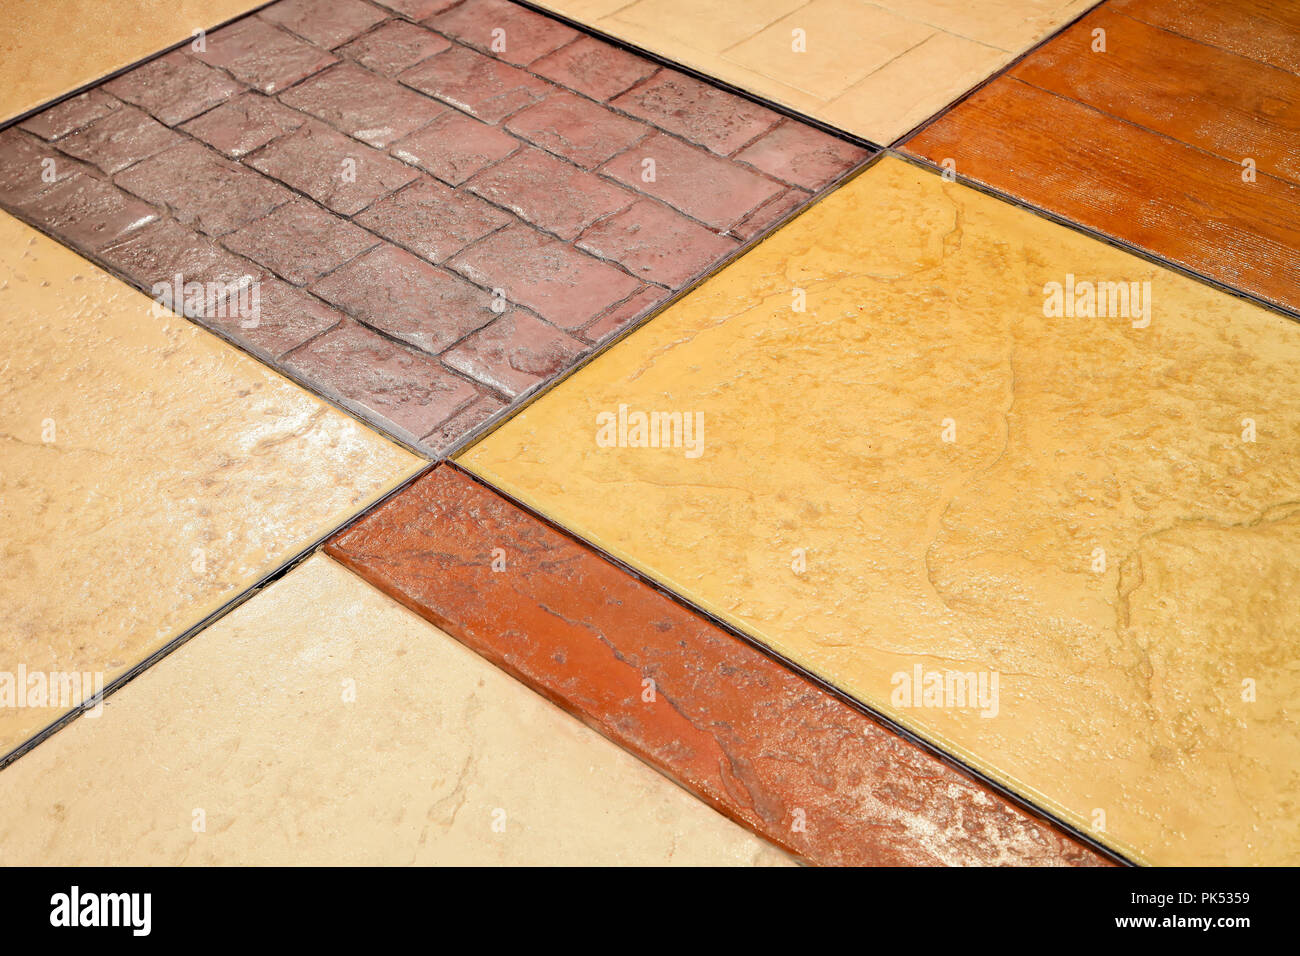 Various Natural Stones And Marble Flooring Tiles Stock Photo Alamy